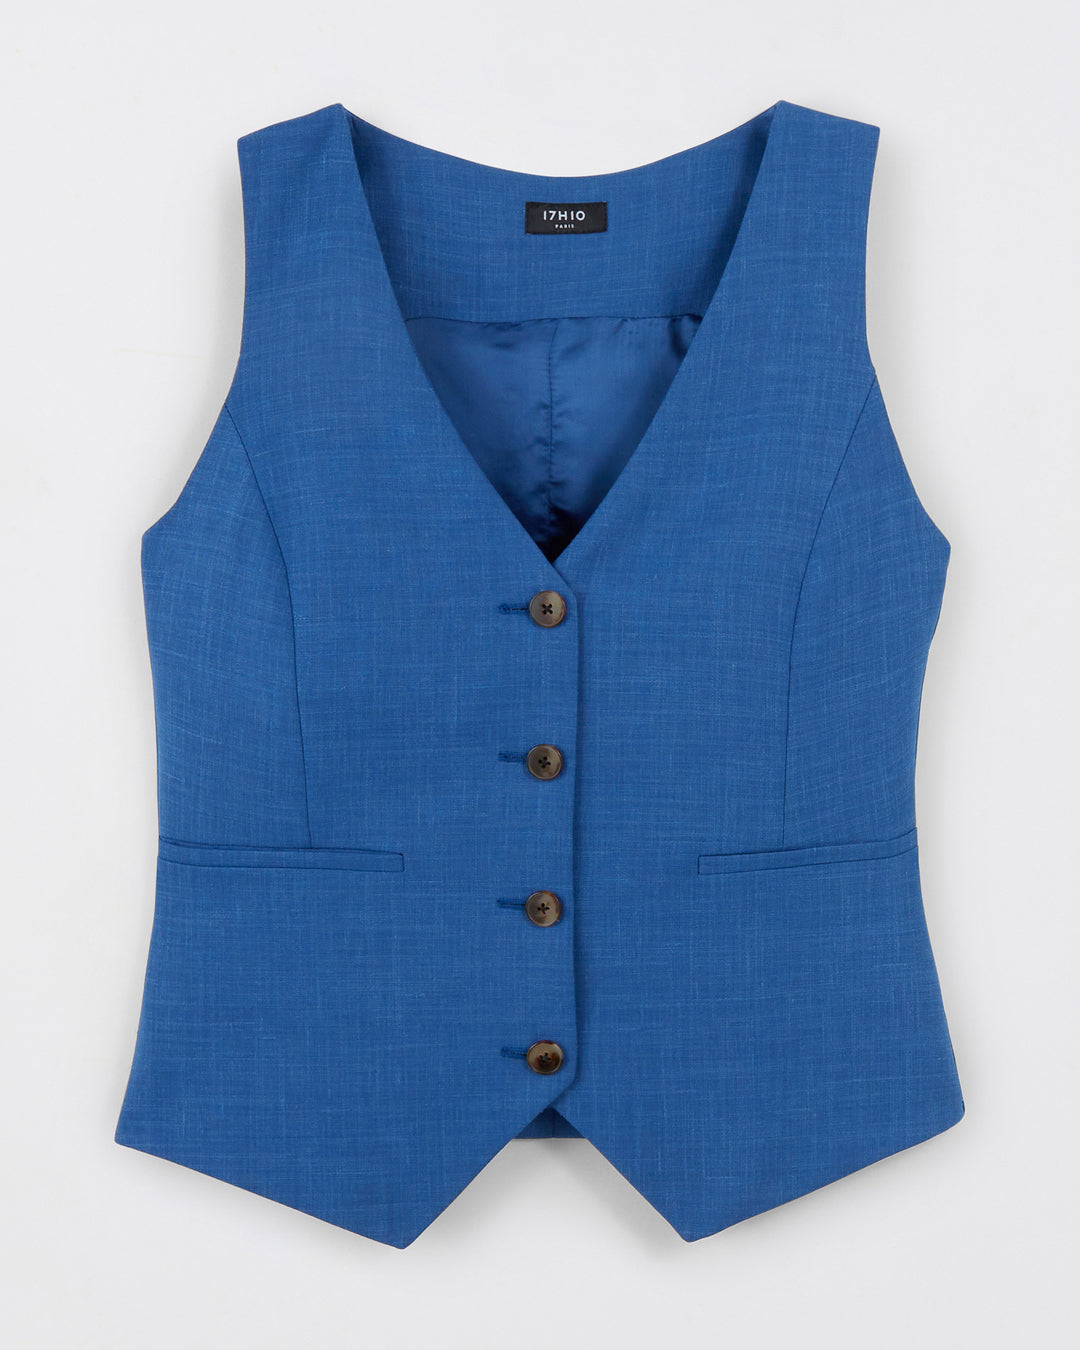 Waistcoat-white-without-sleeve-Collar-in-V-Four-buttons-covered-Fastening-to-simple-buttoning-Door-open-or-closed-Pockets-Passpiped-Totally-doubled-17H10-tailors-for-women-paris-